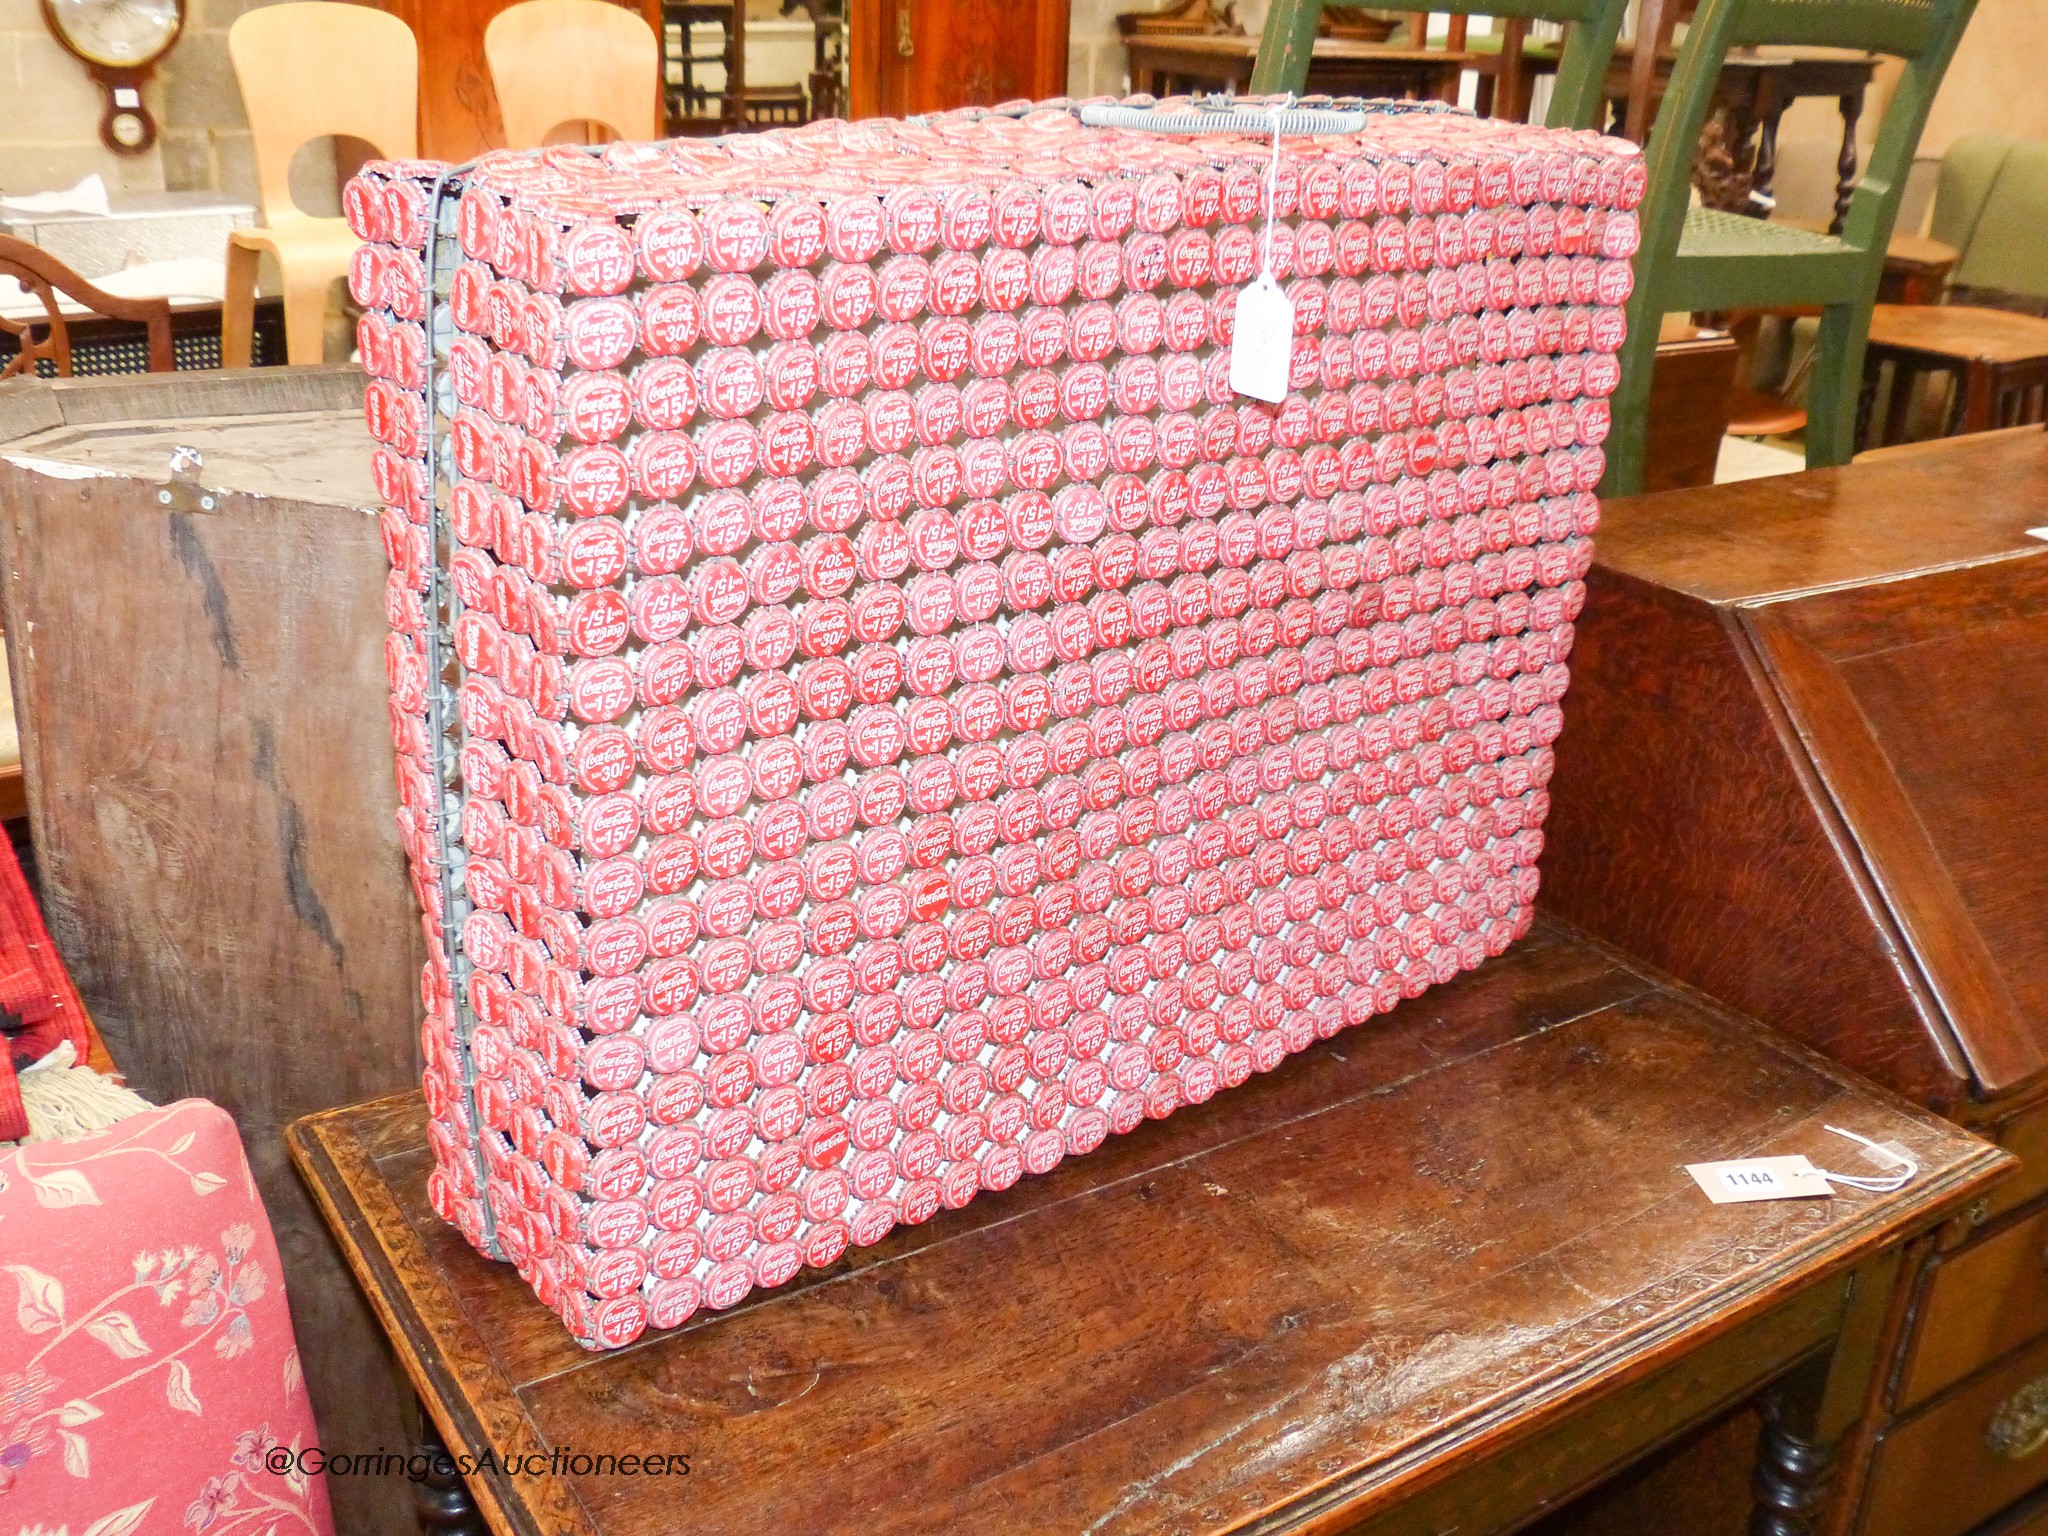 An unusual wirework suitcase, made from vintage Coca Cola bottle caps, 51 x 71cm.